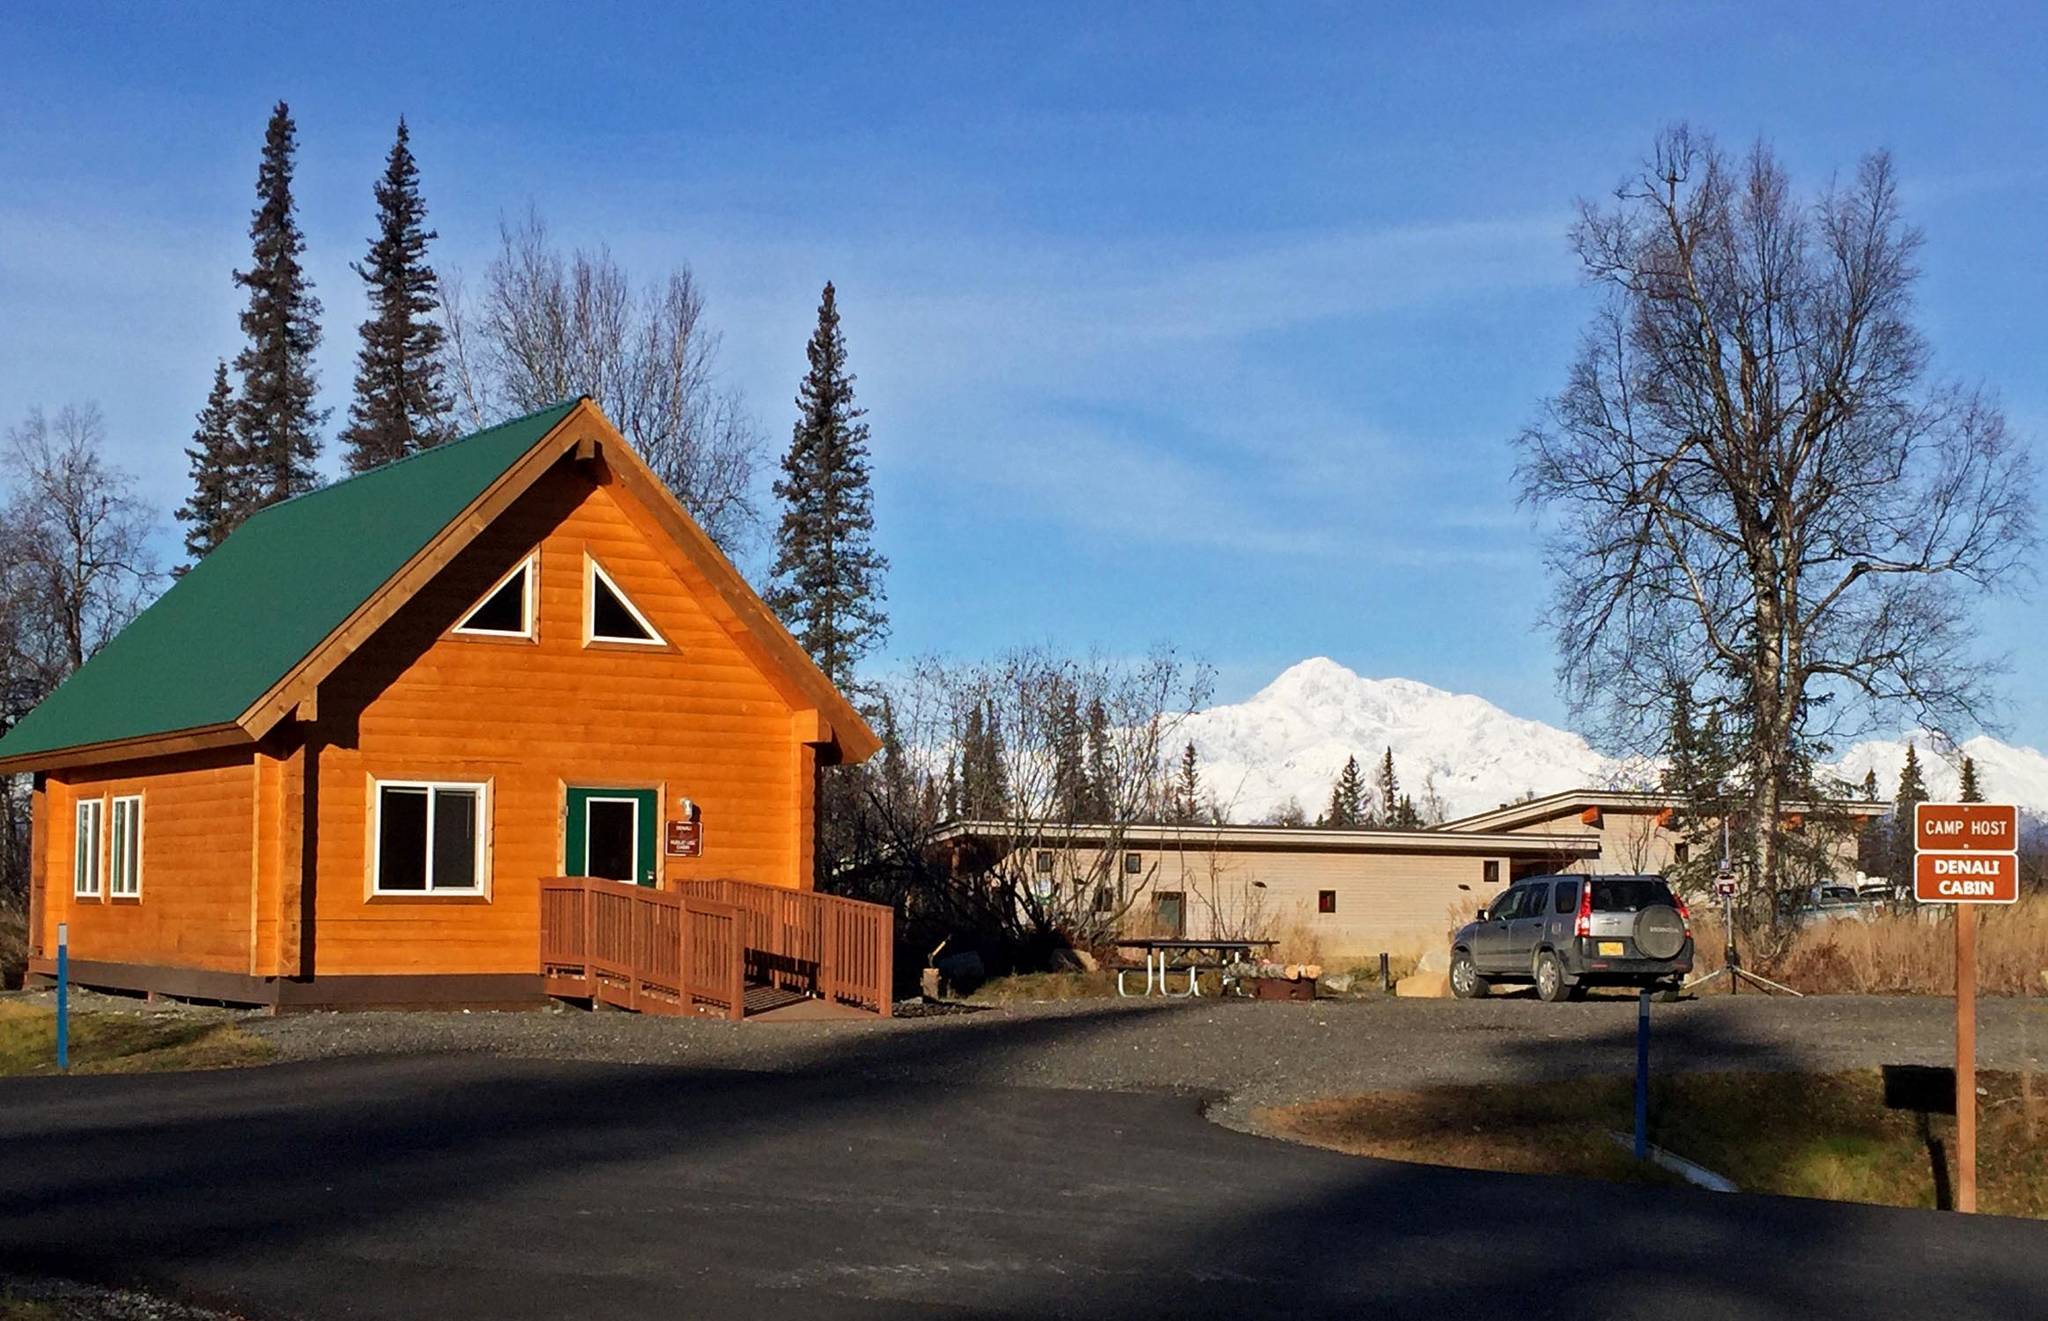 This October 2017 photo shows the Denali Cabin, a public use cabin, at the Kesugi Ken Campground near Denali State Park, Alaska. The Denali Cabin is one of an extensive system of federal- and state-owned public use cabins on park lands across the state of Alaska. (Photo by Elizabeth Earl/Peninsula Clarion)